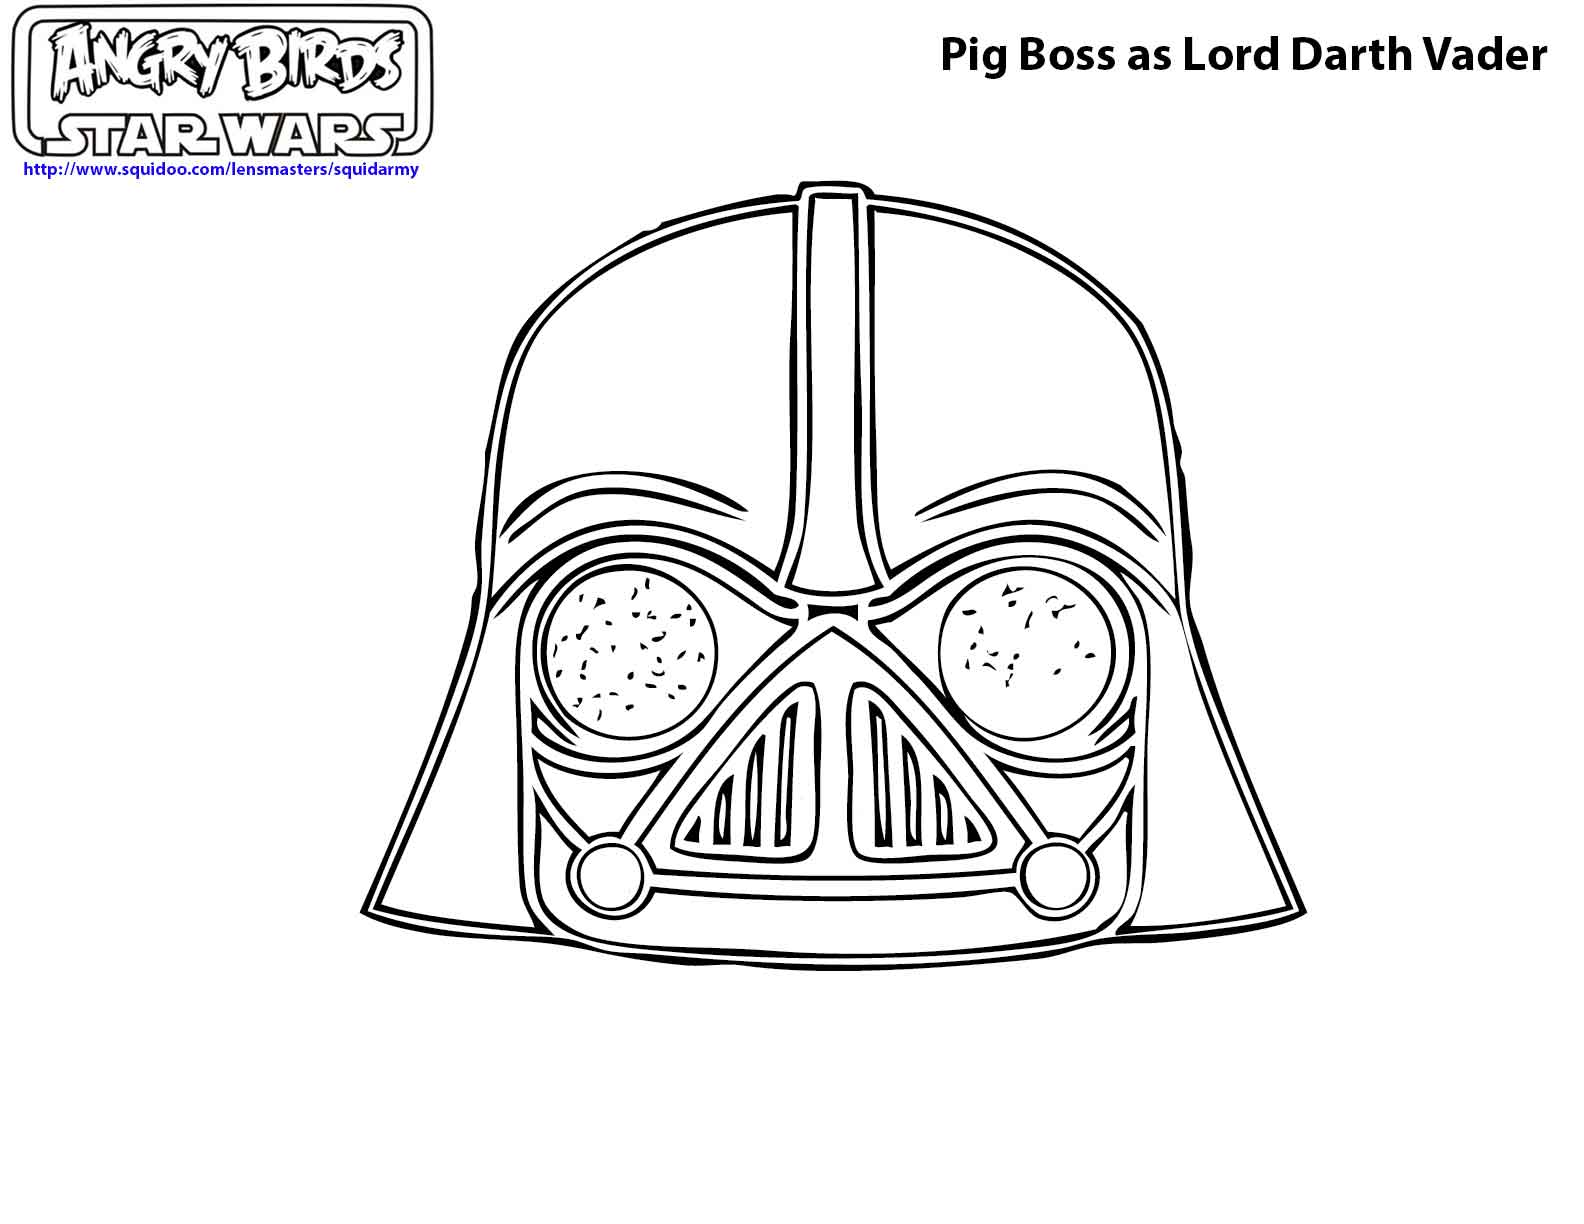 Star Wars Coloring Pages TV & Films ColoringPedia - star wars coloring pages printable